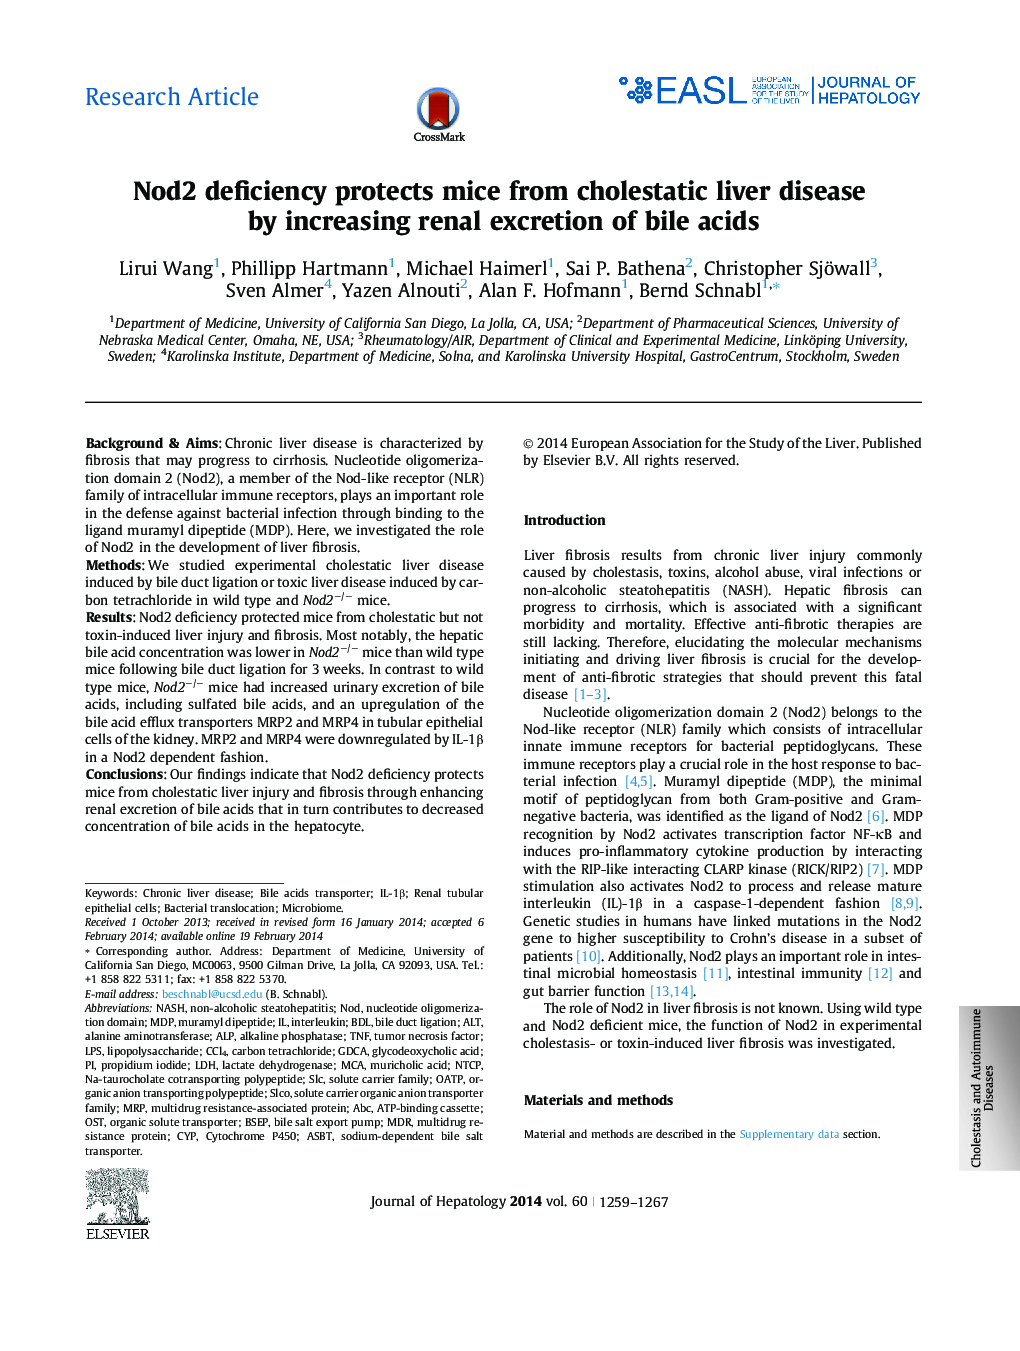 Research ArticleNod2 deficiency protects mice from cholestatic liver disease by increasing renal excretion of bile acids